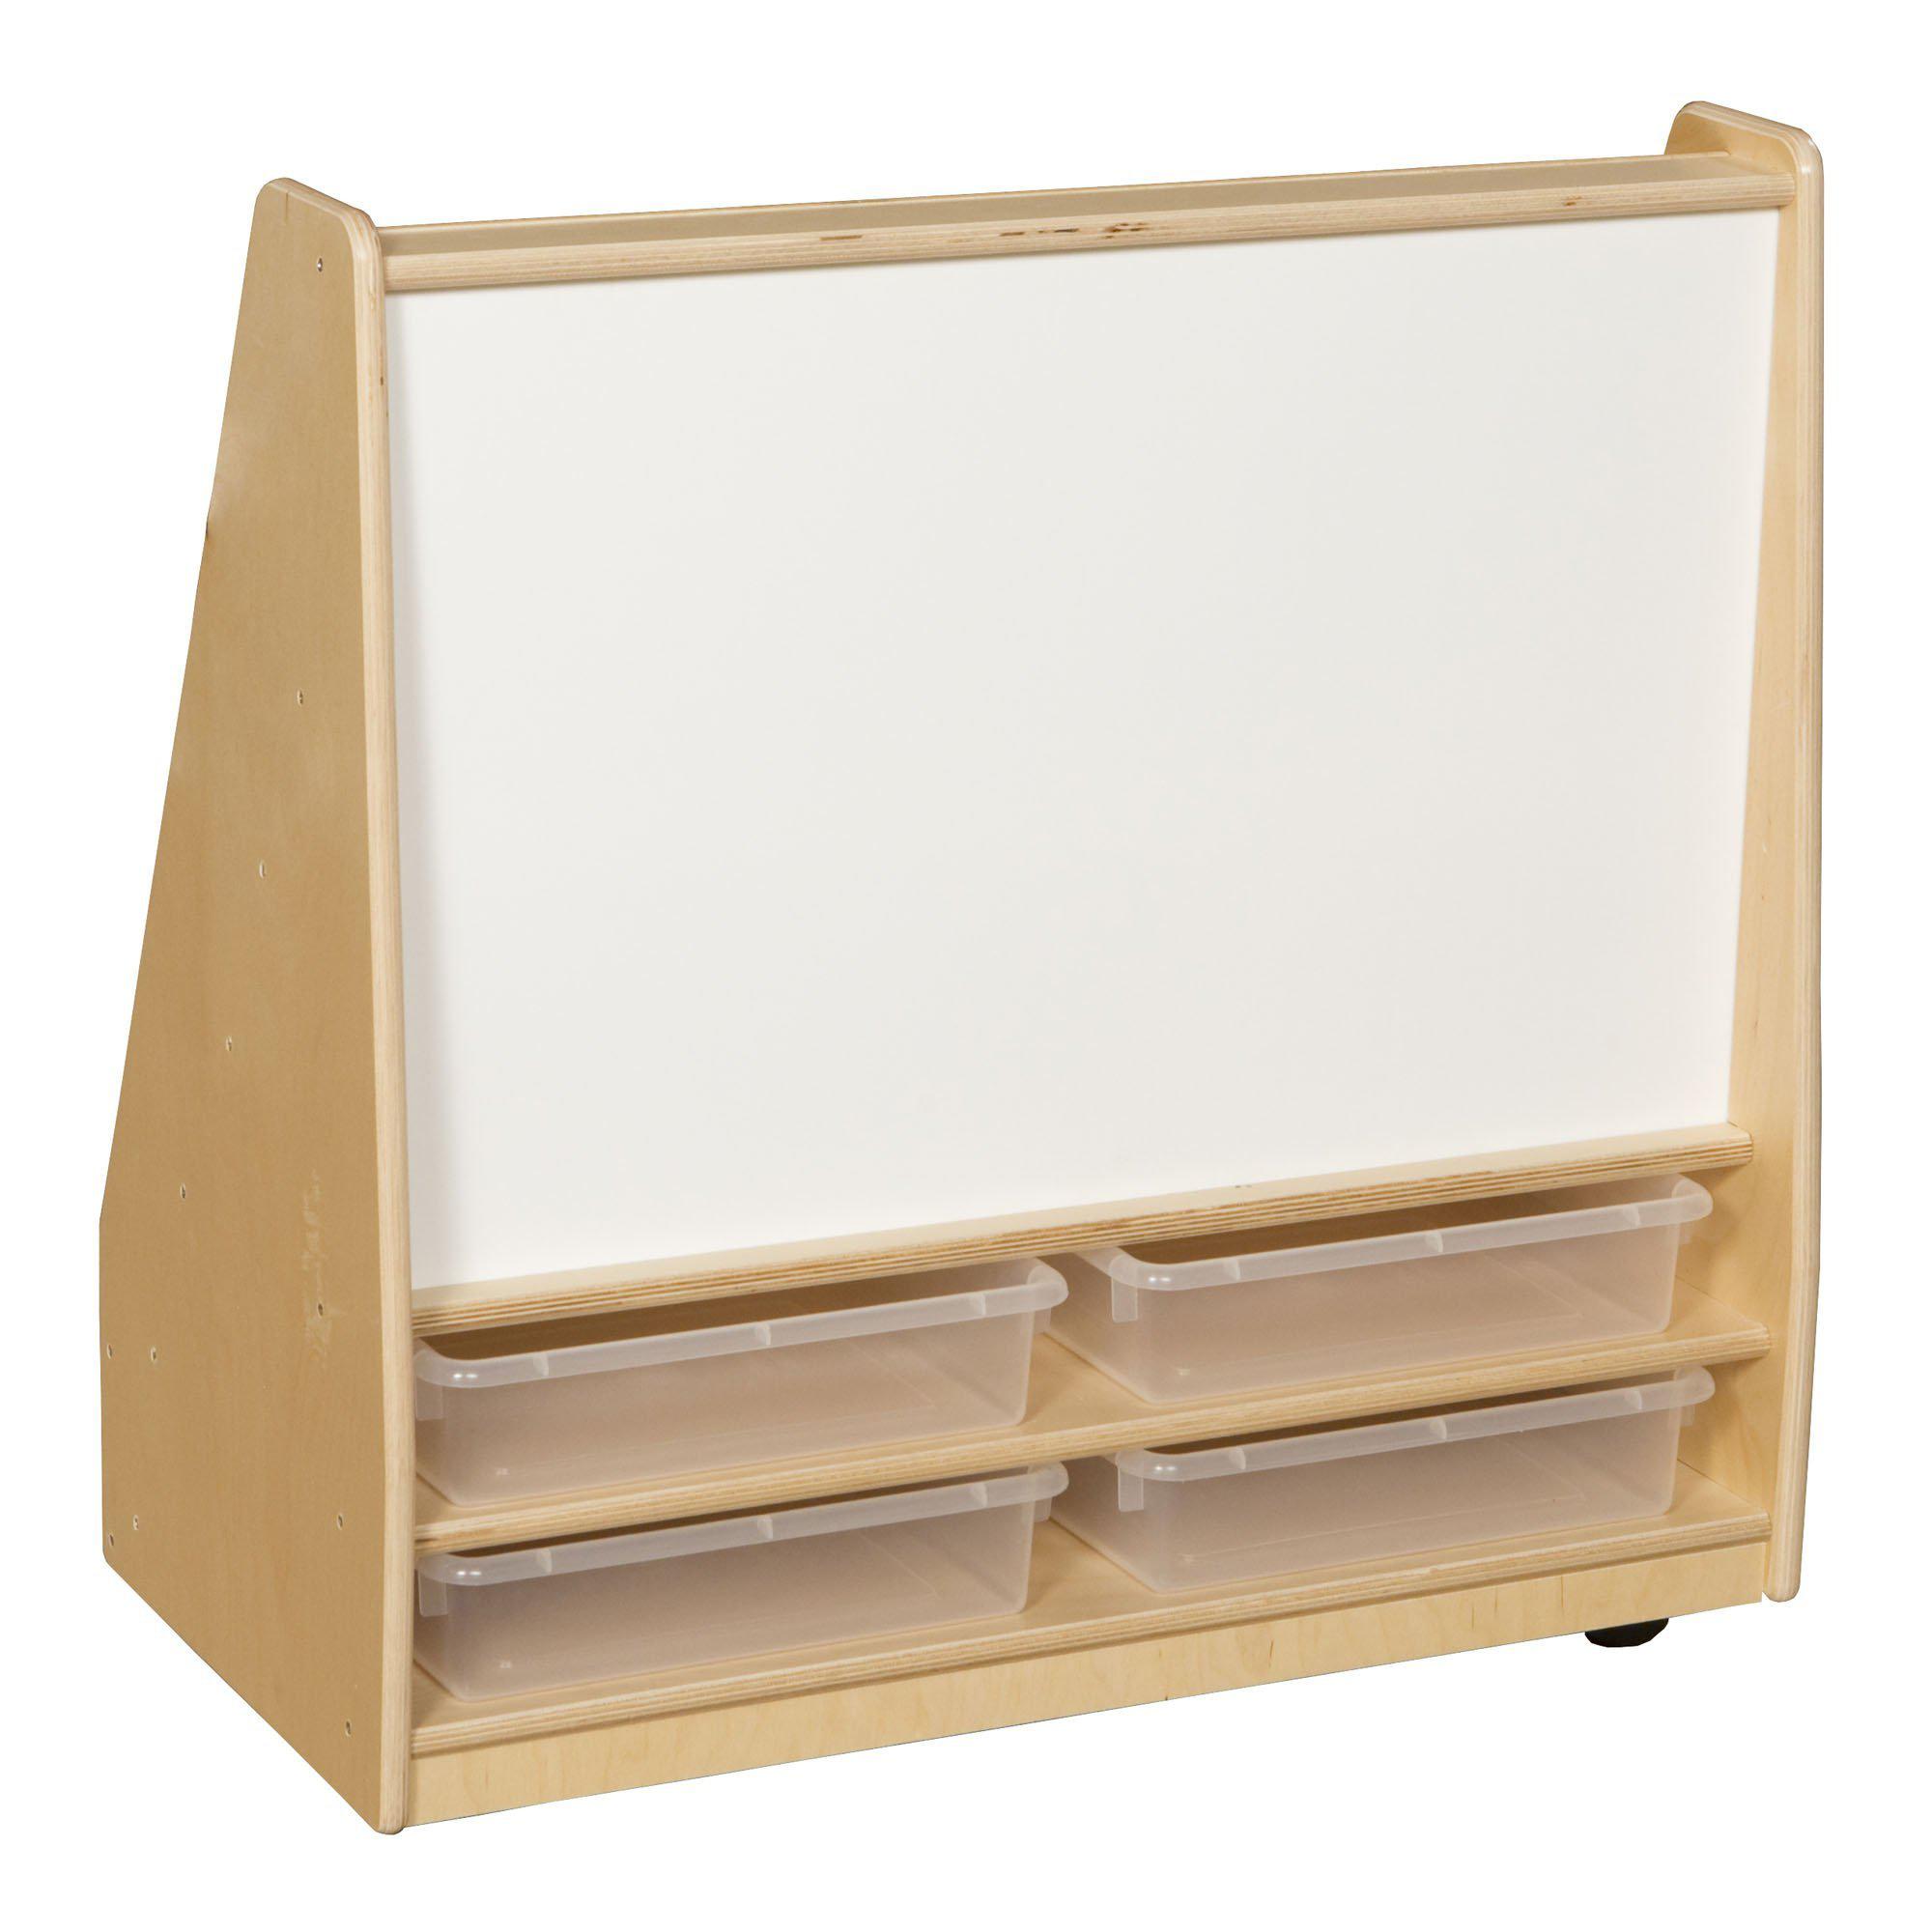 ILLUSTRATION BOARD G/W 10X15 Archives - Biggest Online Office Supplies Store